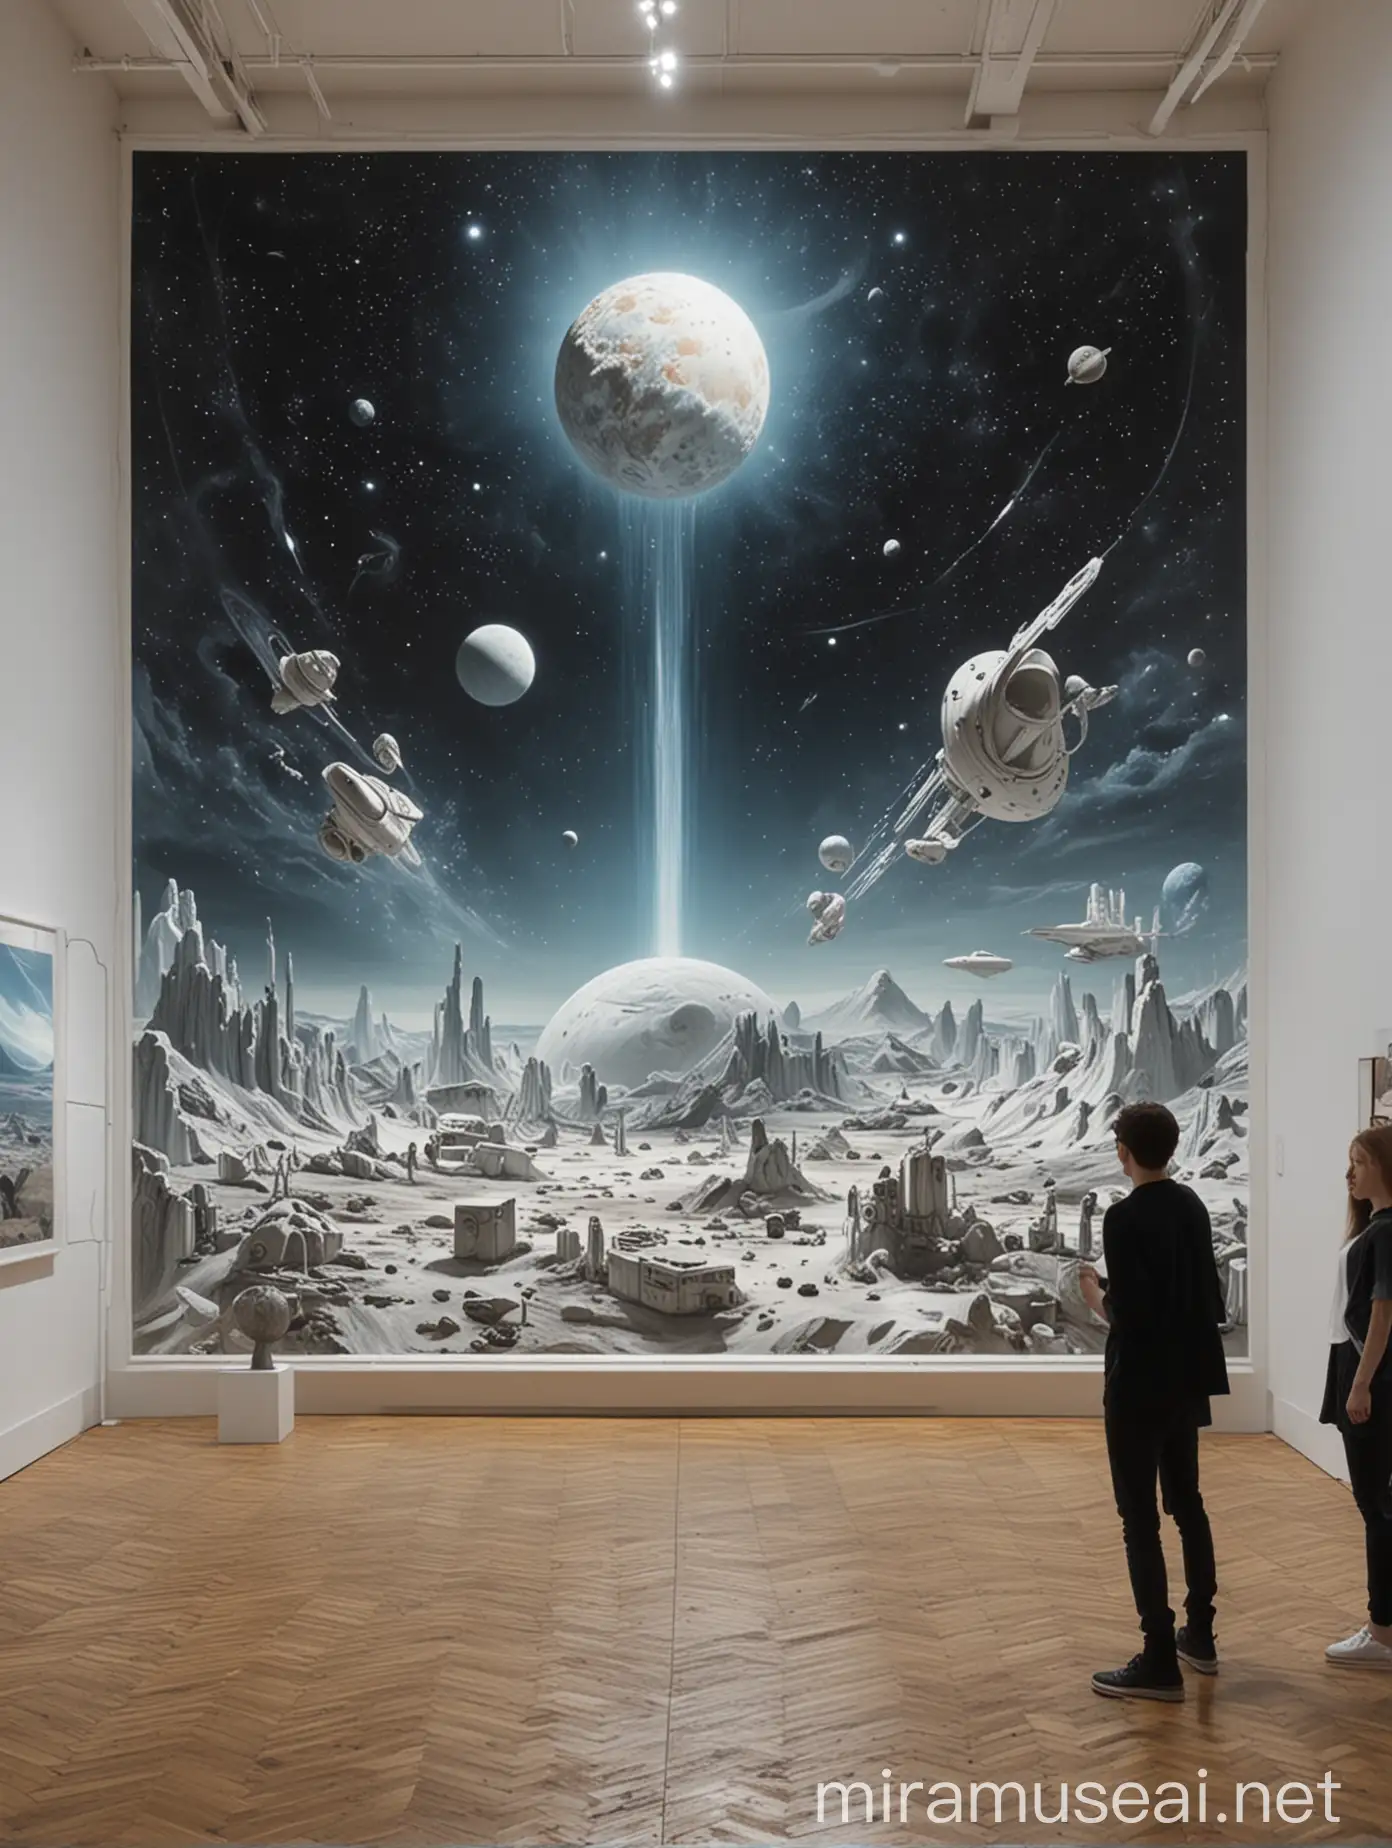 Future Life and Space Inspired Art Exhibition